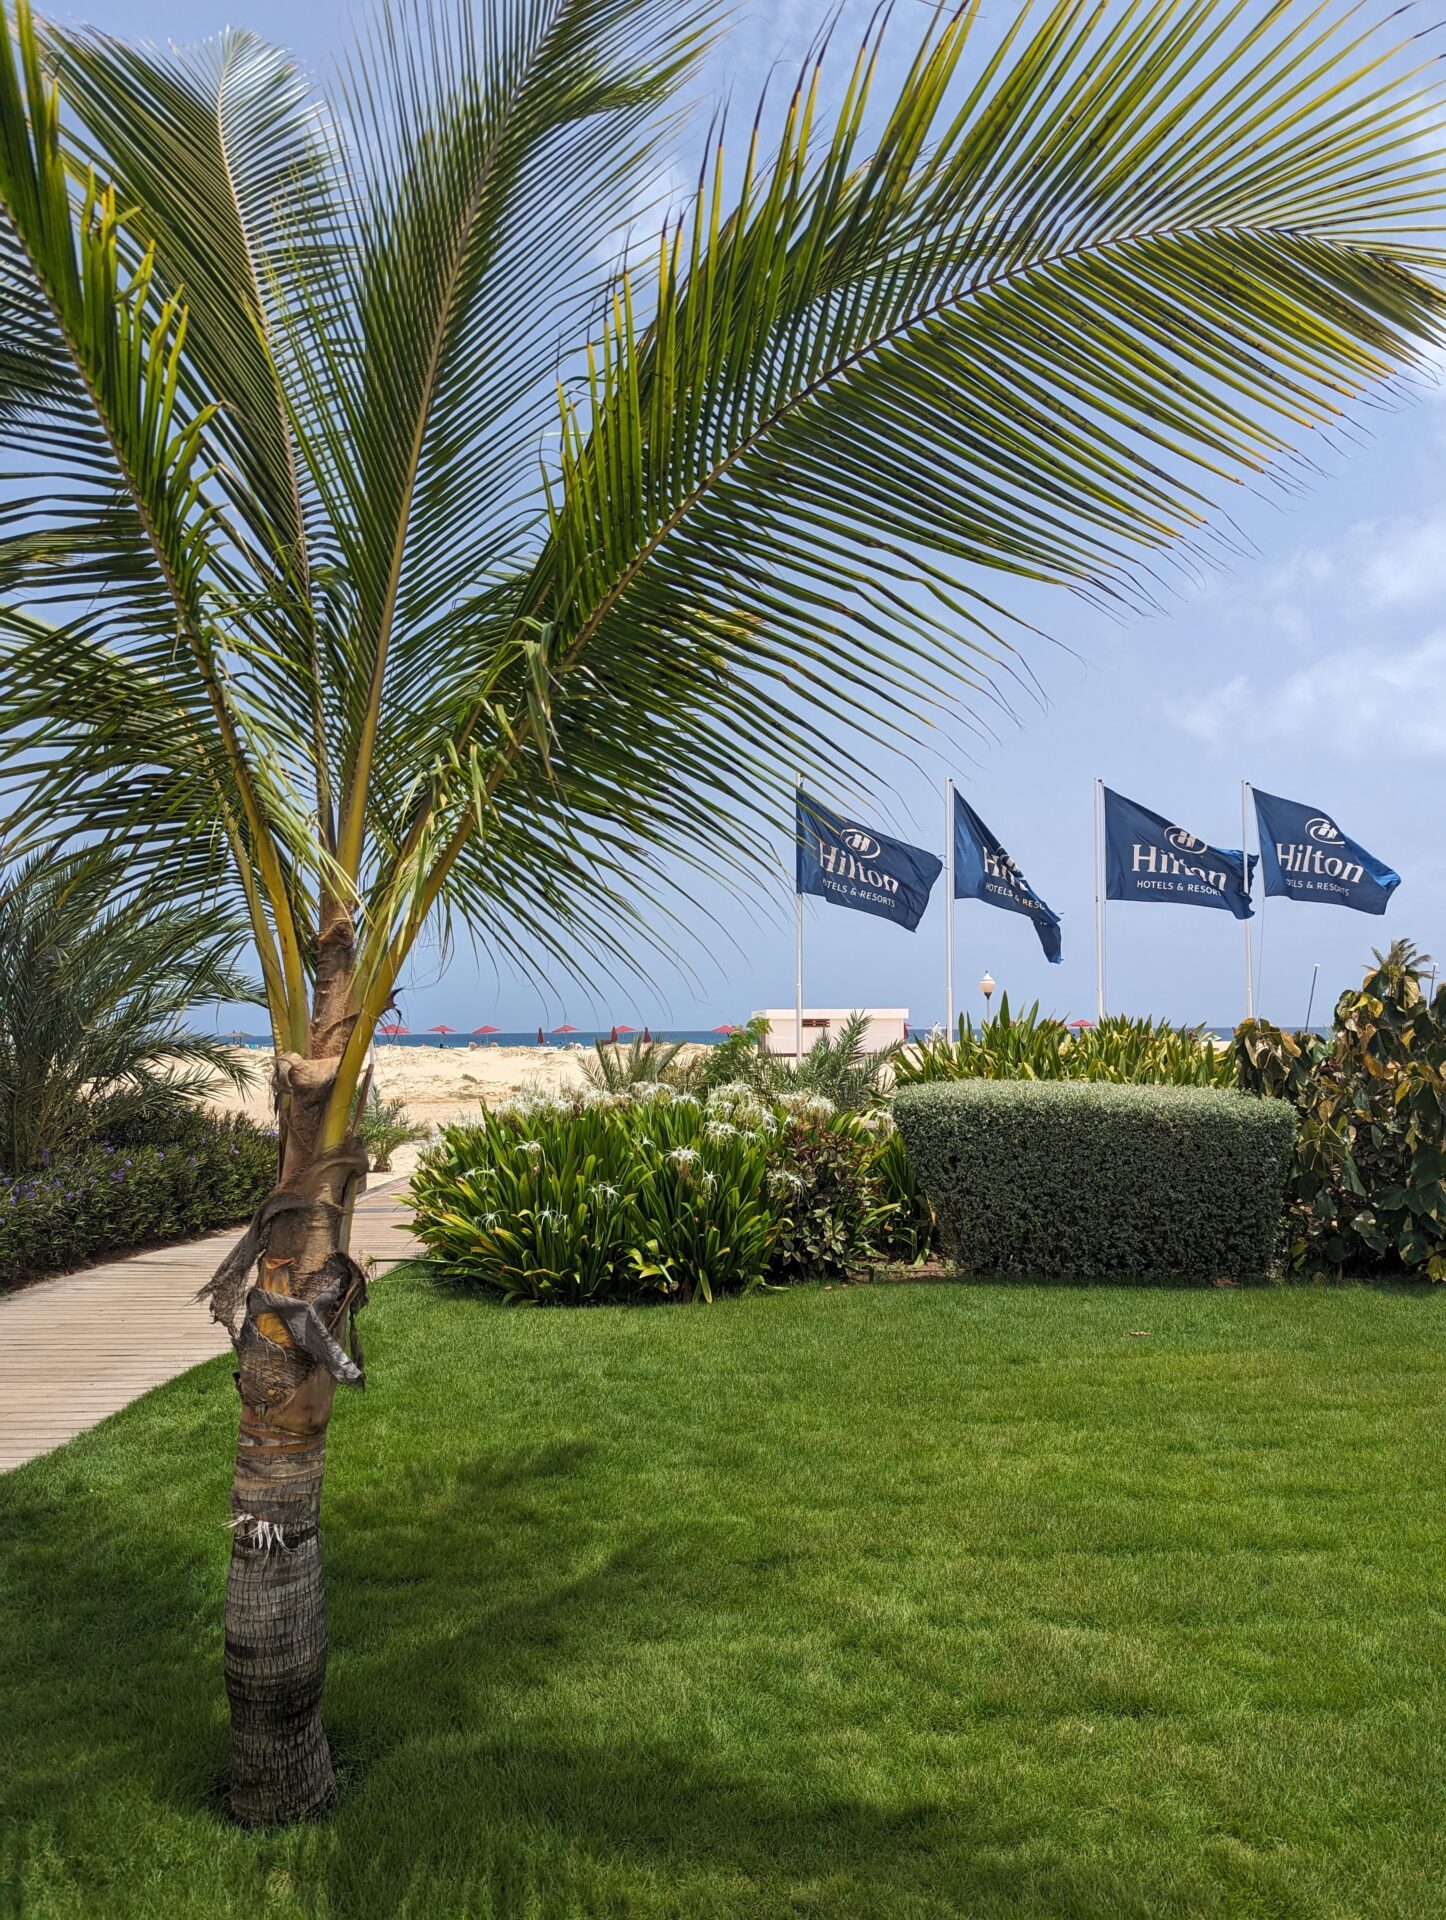 a palm tree with flags in the wind